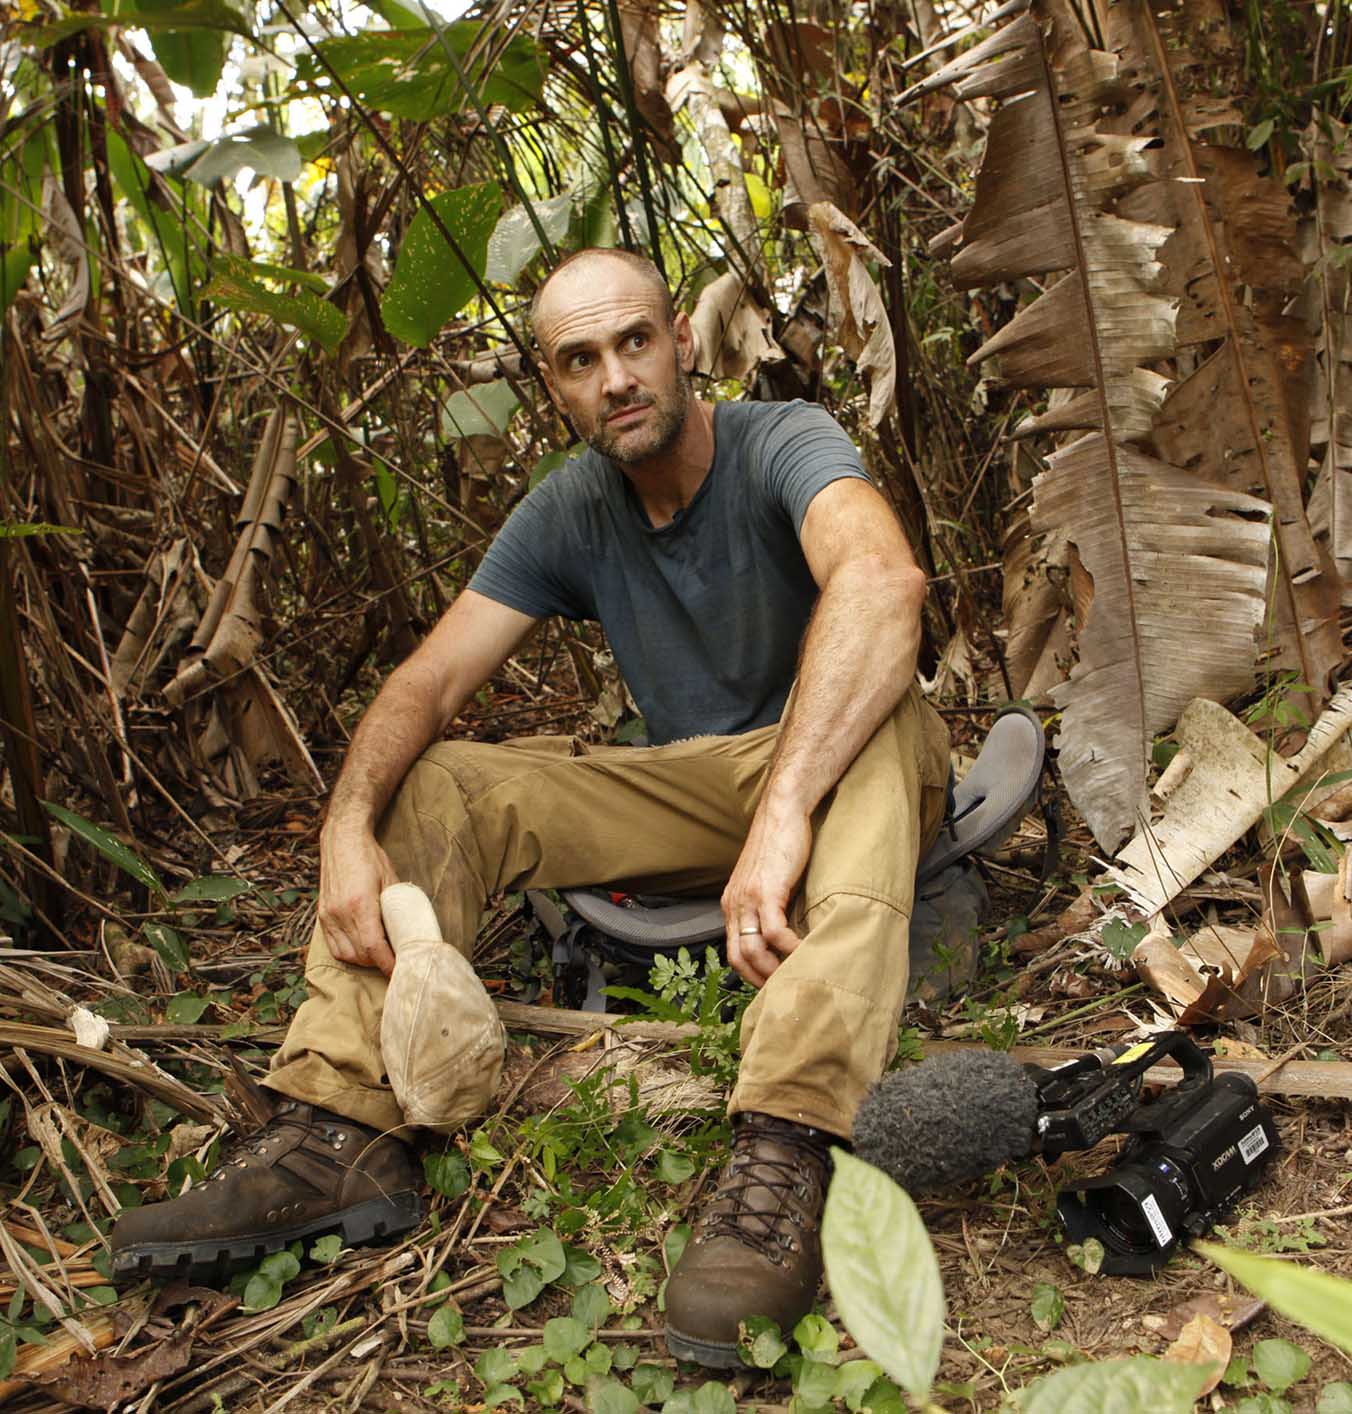 Ed Stafford: Travelling without your family is tough – but so important ...